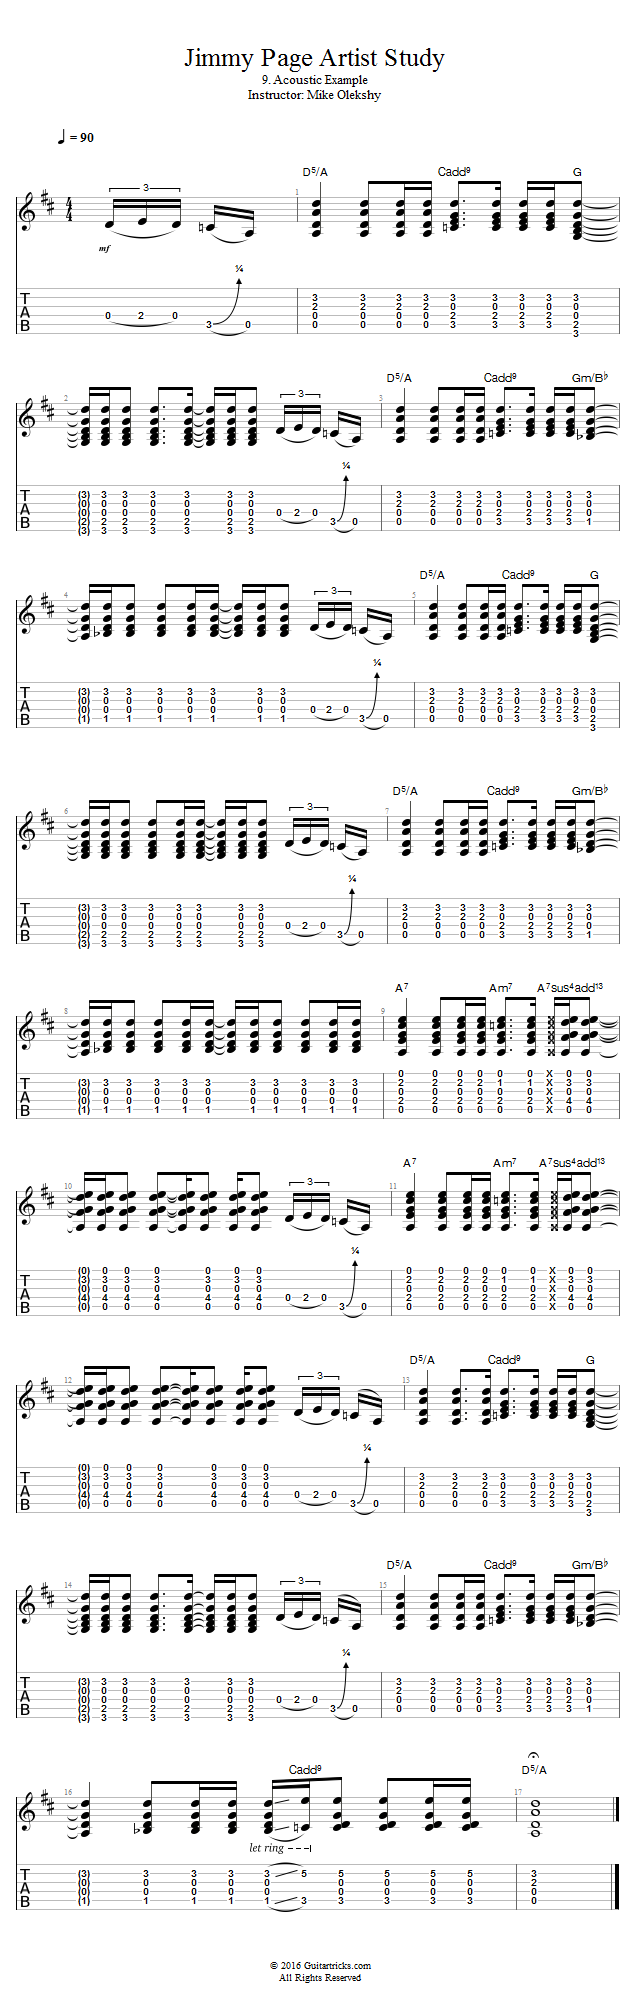 Acoustic Example song notation